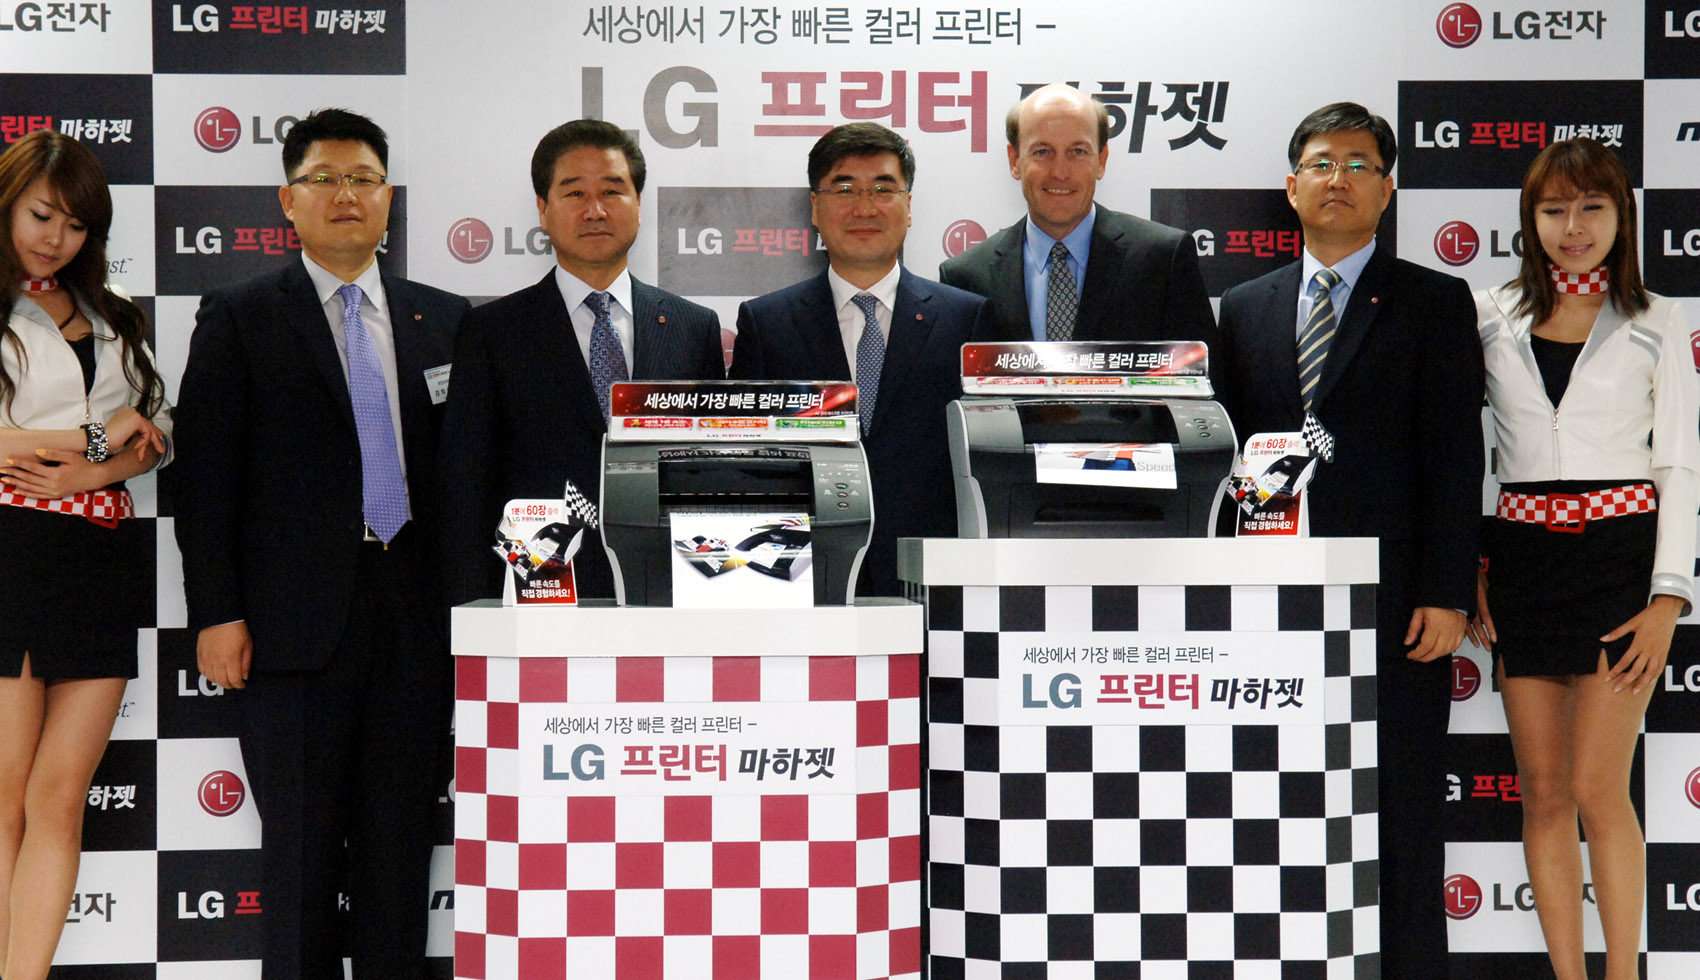 LG representatives and Len Lauer, president and CEO of Memje, present LG’s Machjet, the world’s fastest A4 color desktop printer